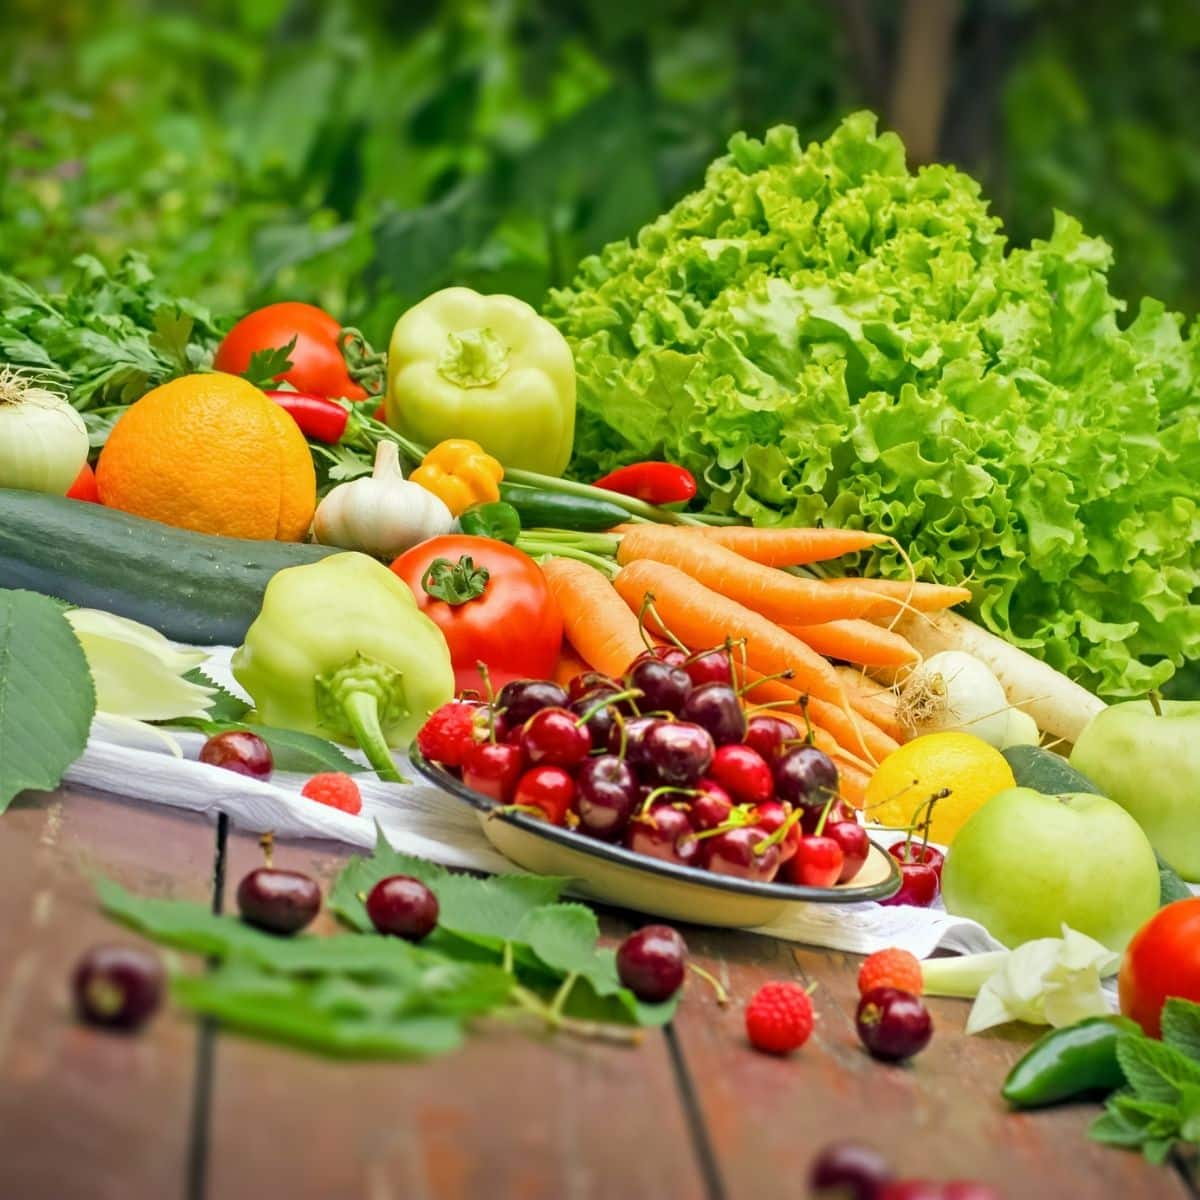 Healthy Vegetables and fruits